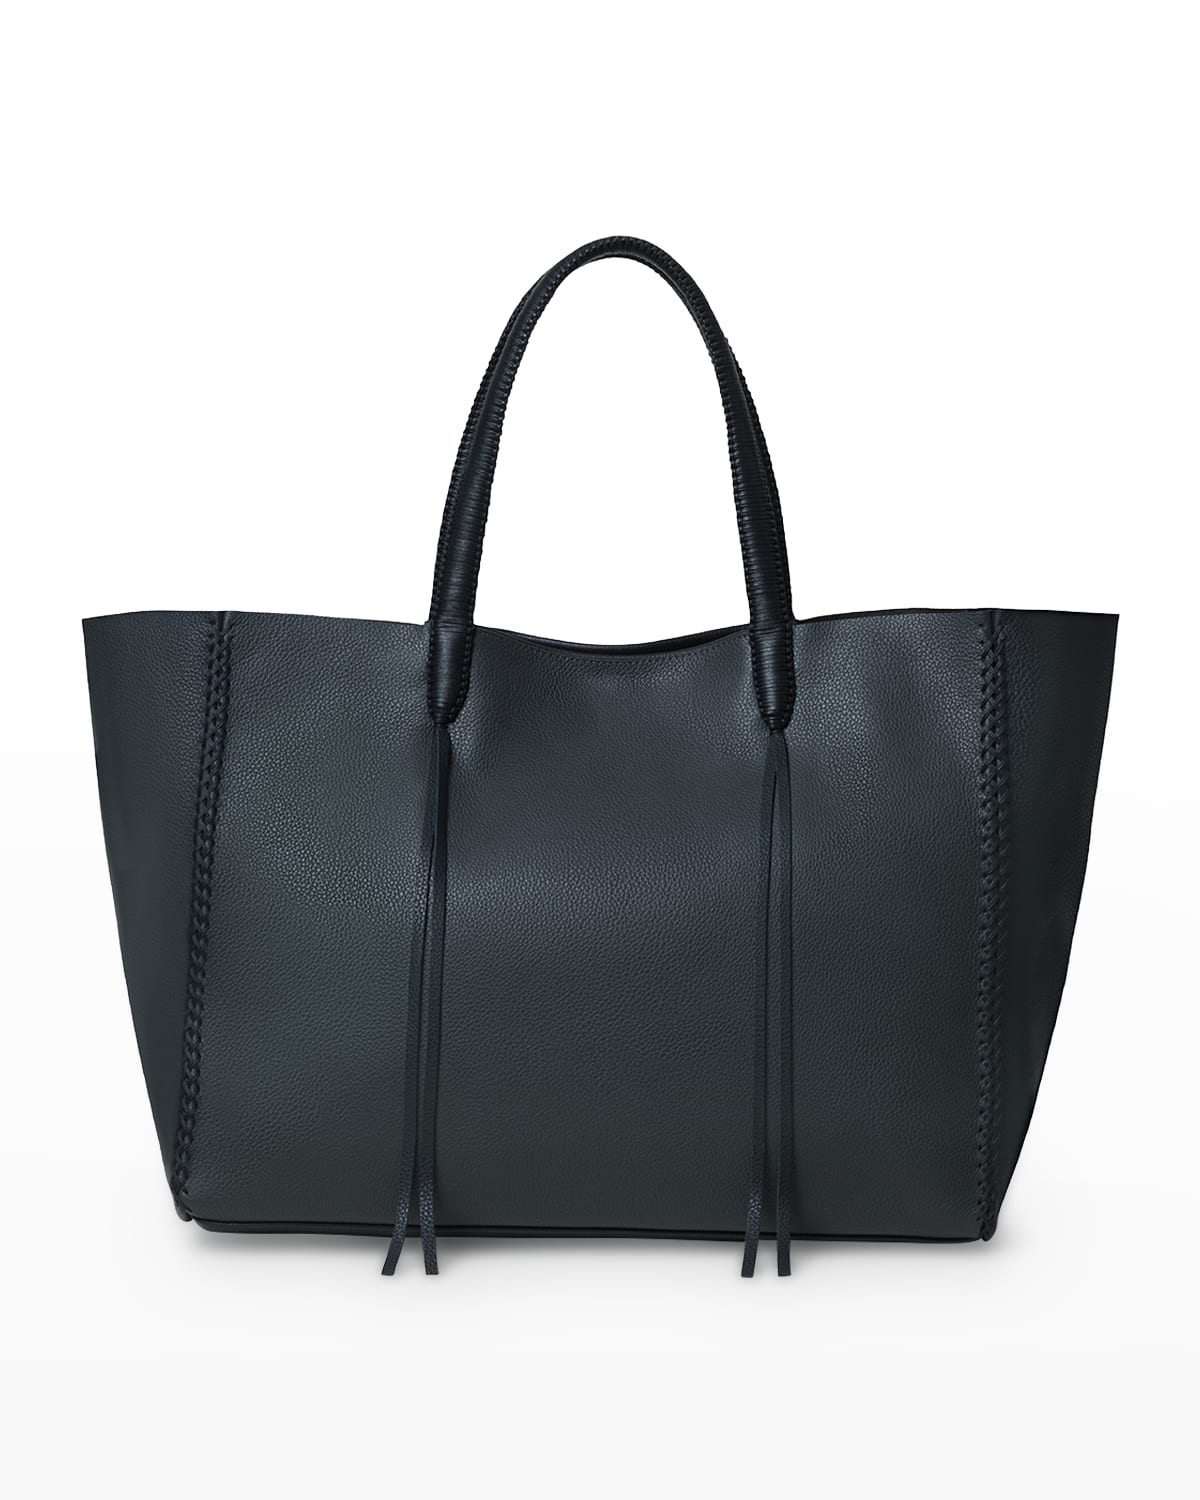 East-West Grained Leather Tote Bag